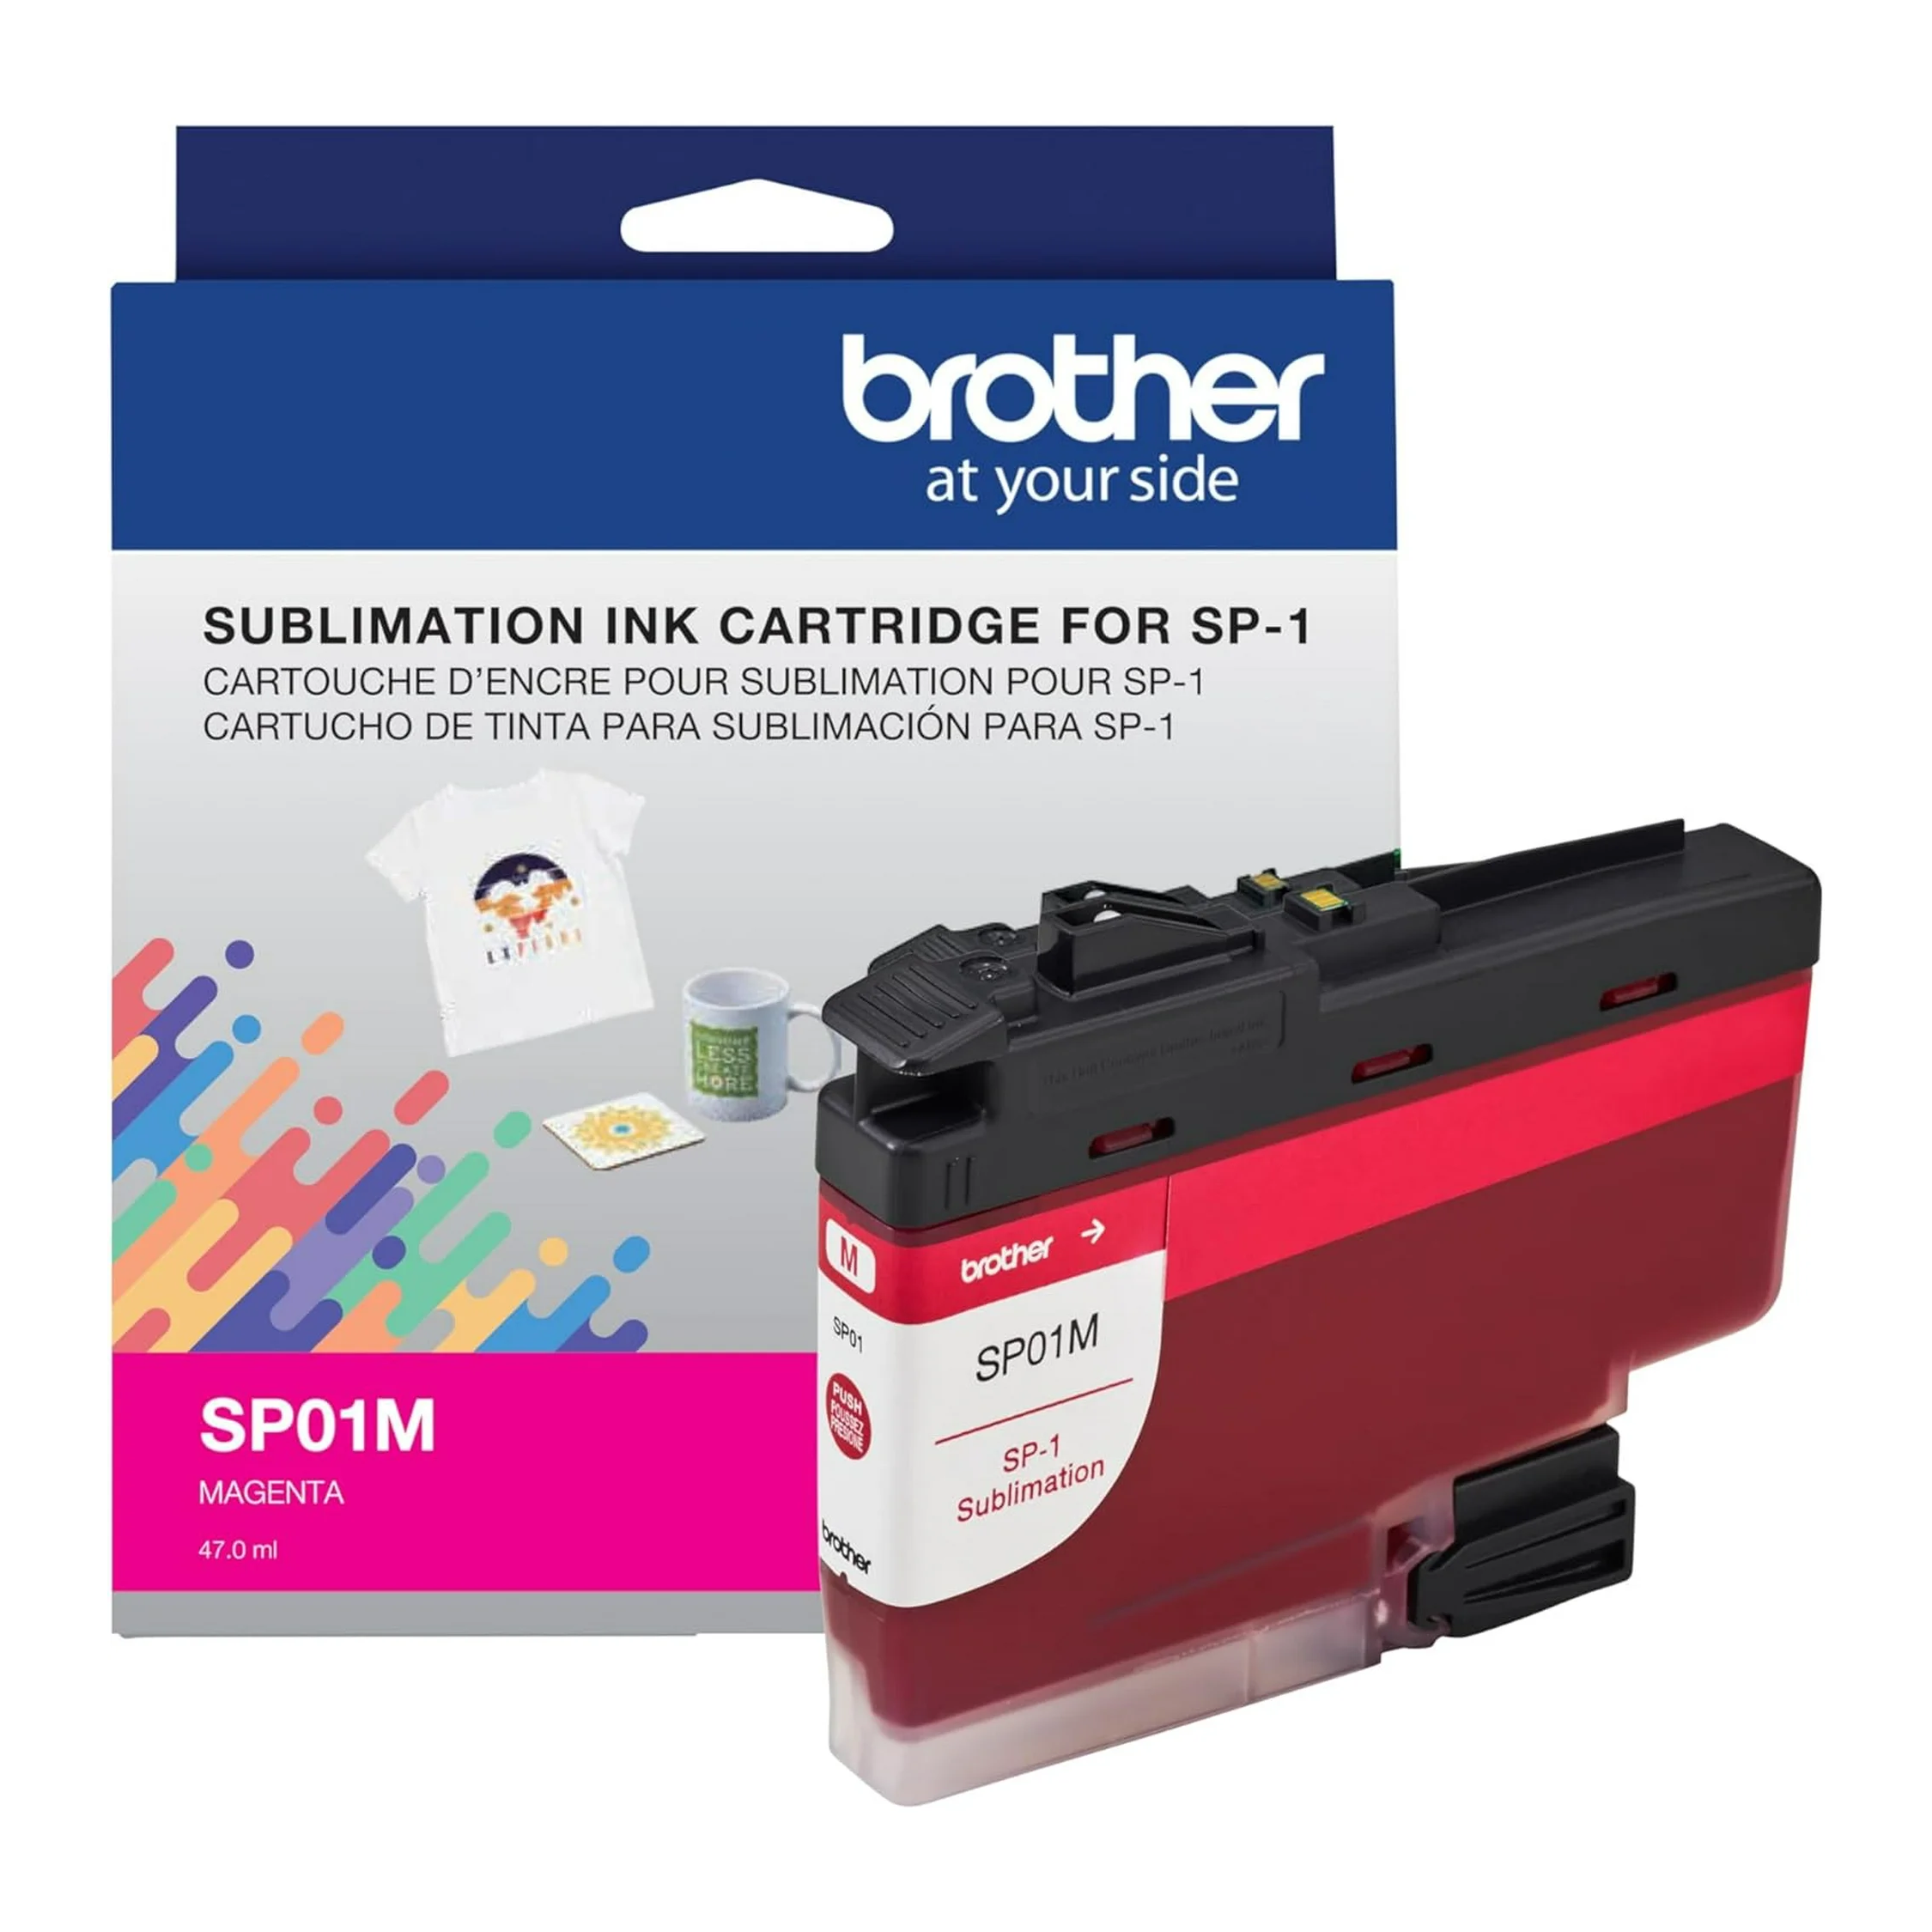 Brother Sublimation Ink Cartridges SP01M for Sale at World Weidner